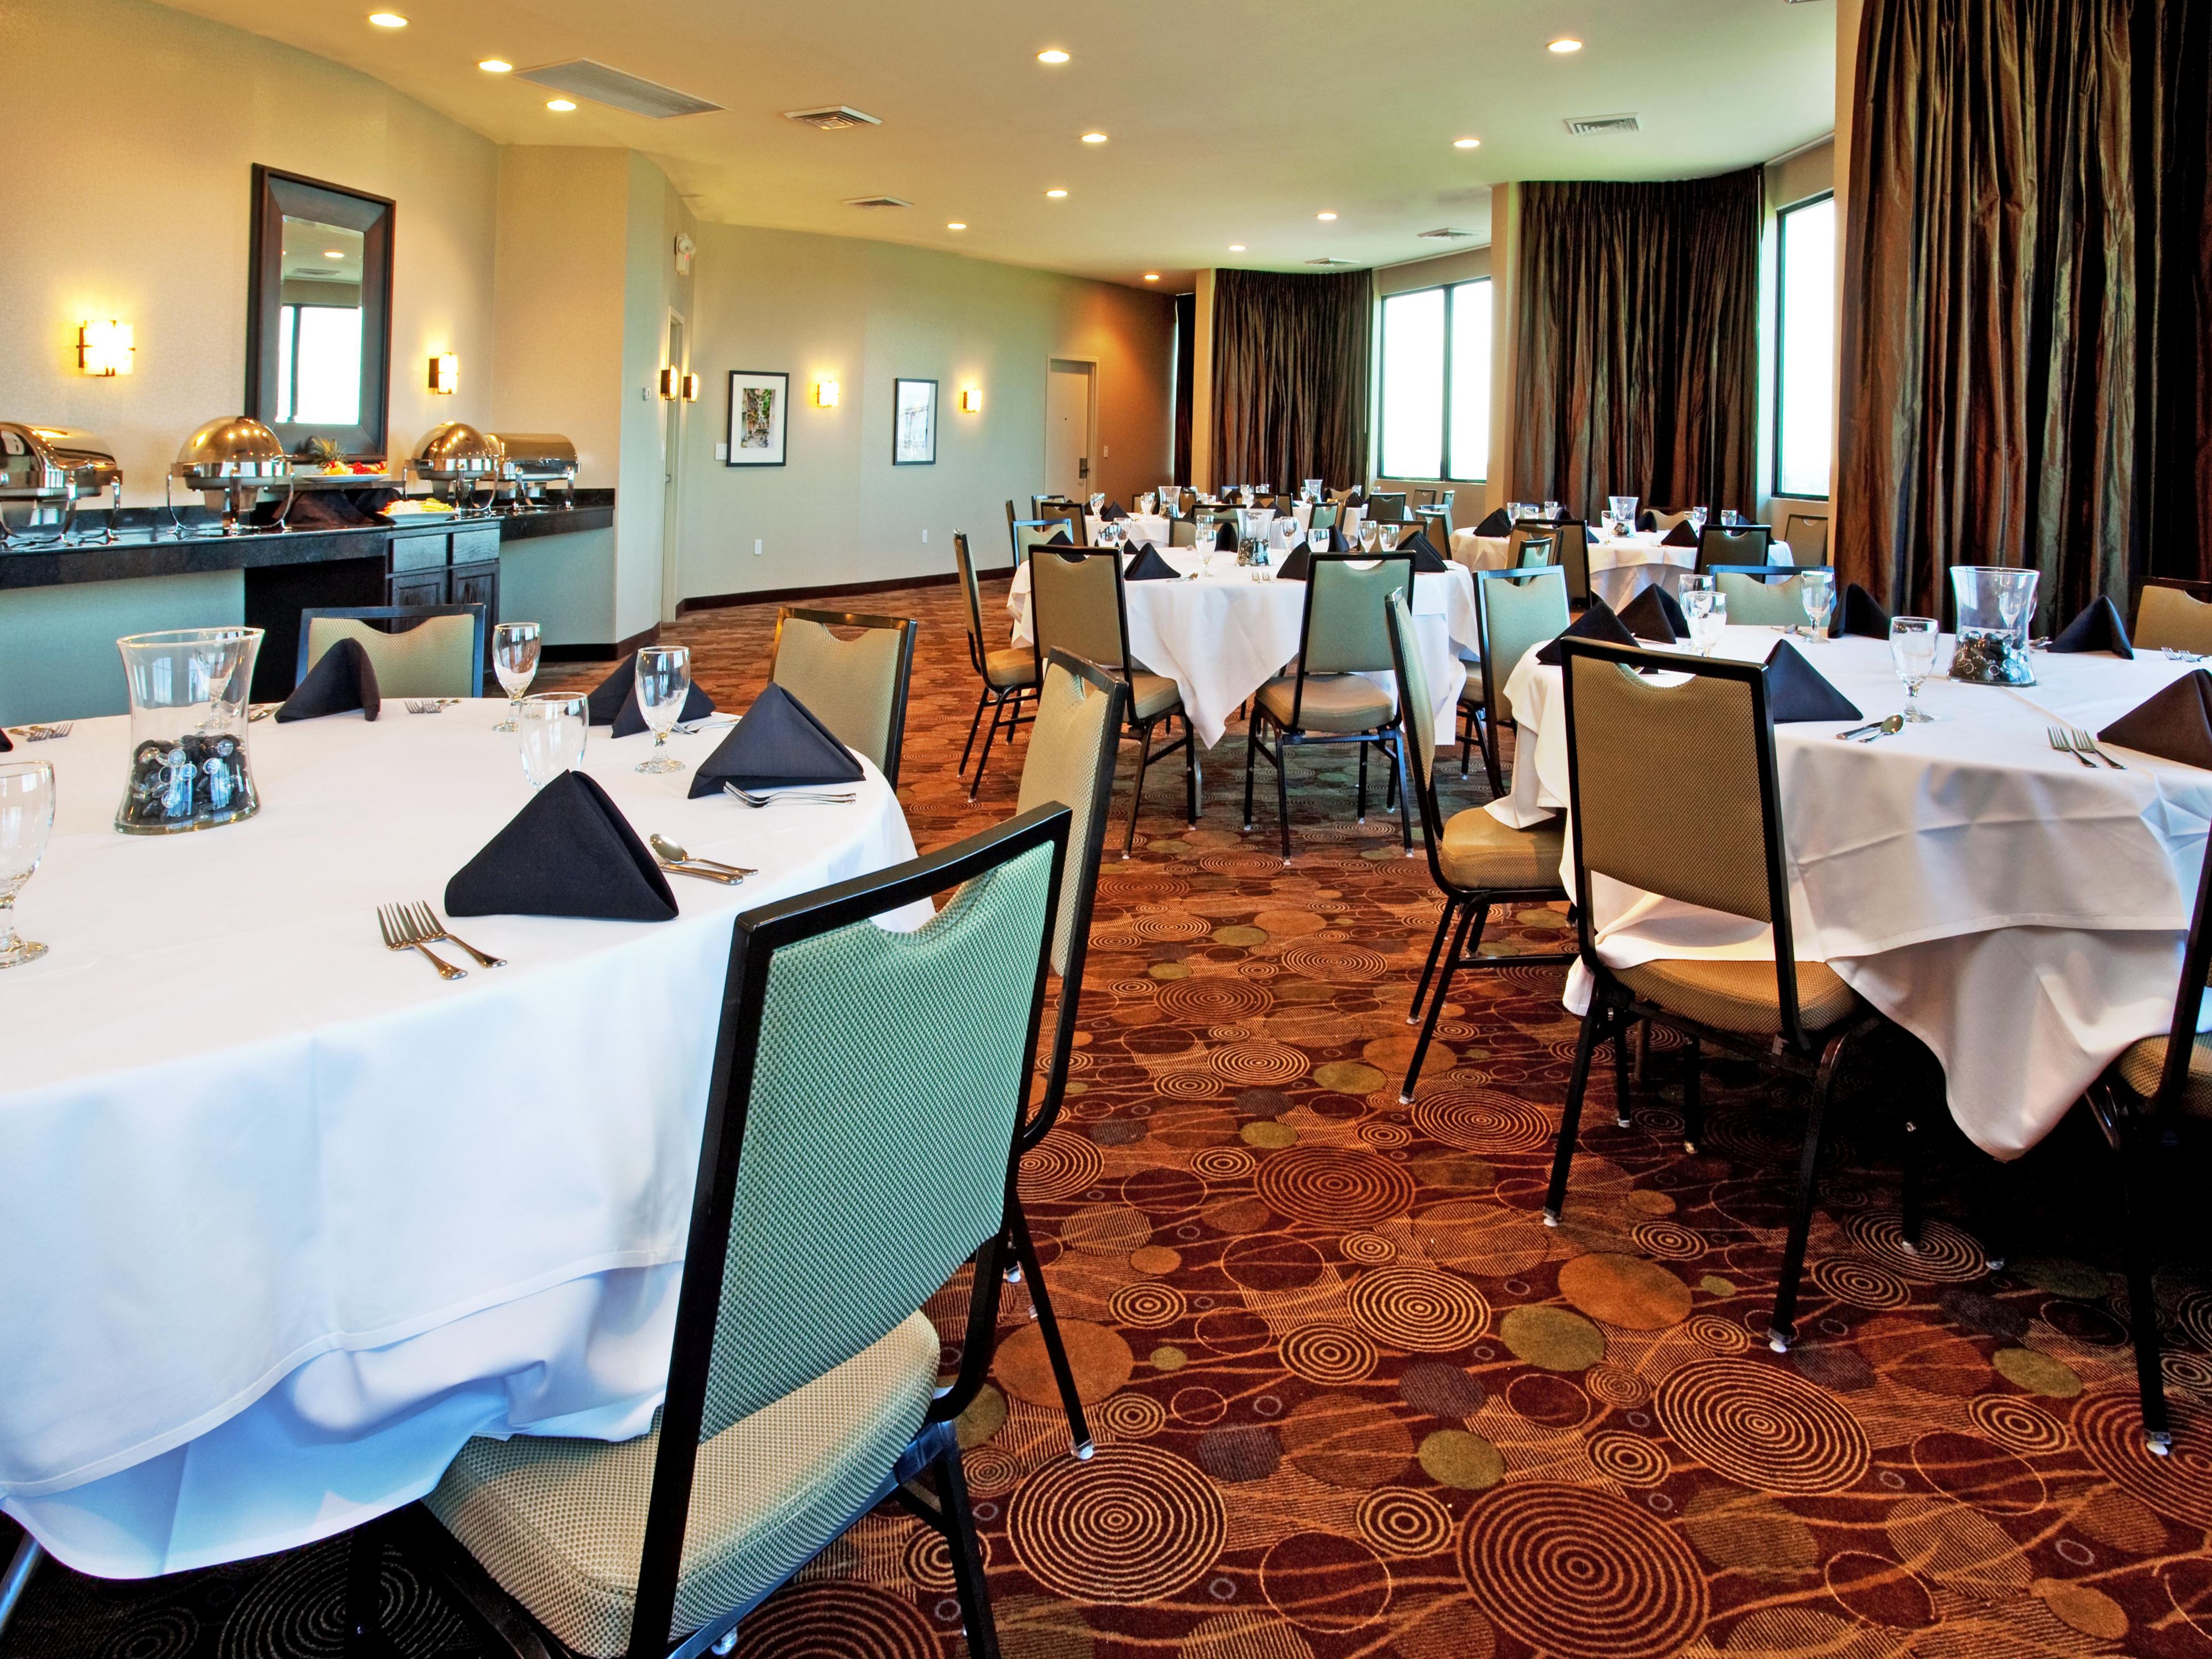 Meetings & Events are our specialty at the Holiday Inn New Orleans West Bank Tower. From a boardroom meeting to a reception with a backdrop of New Orleans, we have everything on site to make your event productive and memorable.